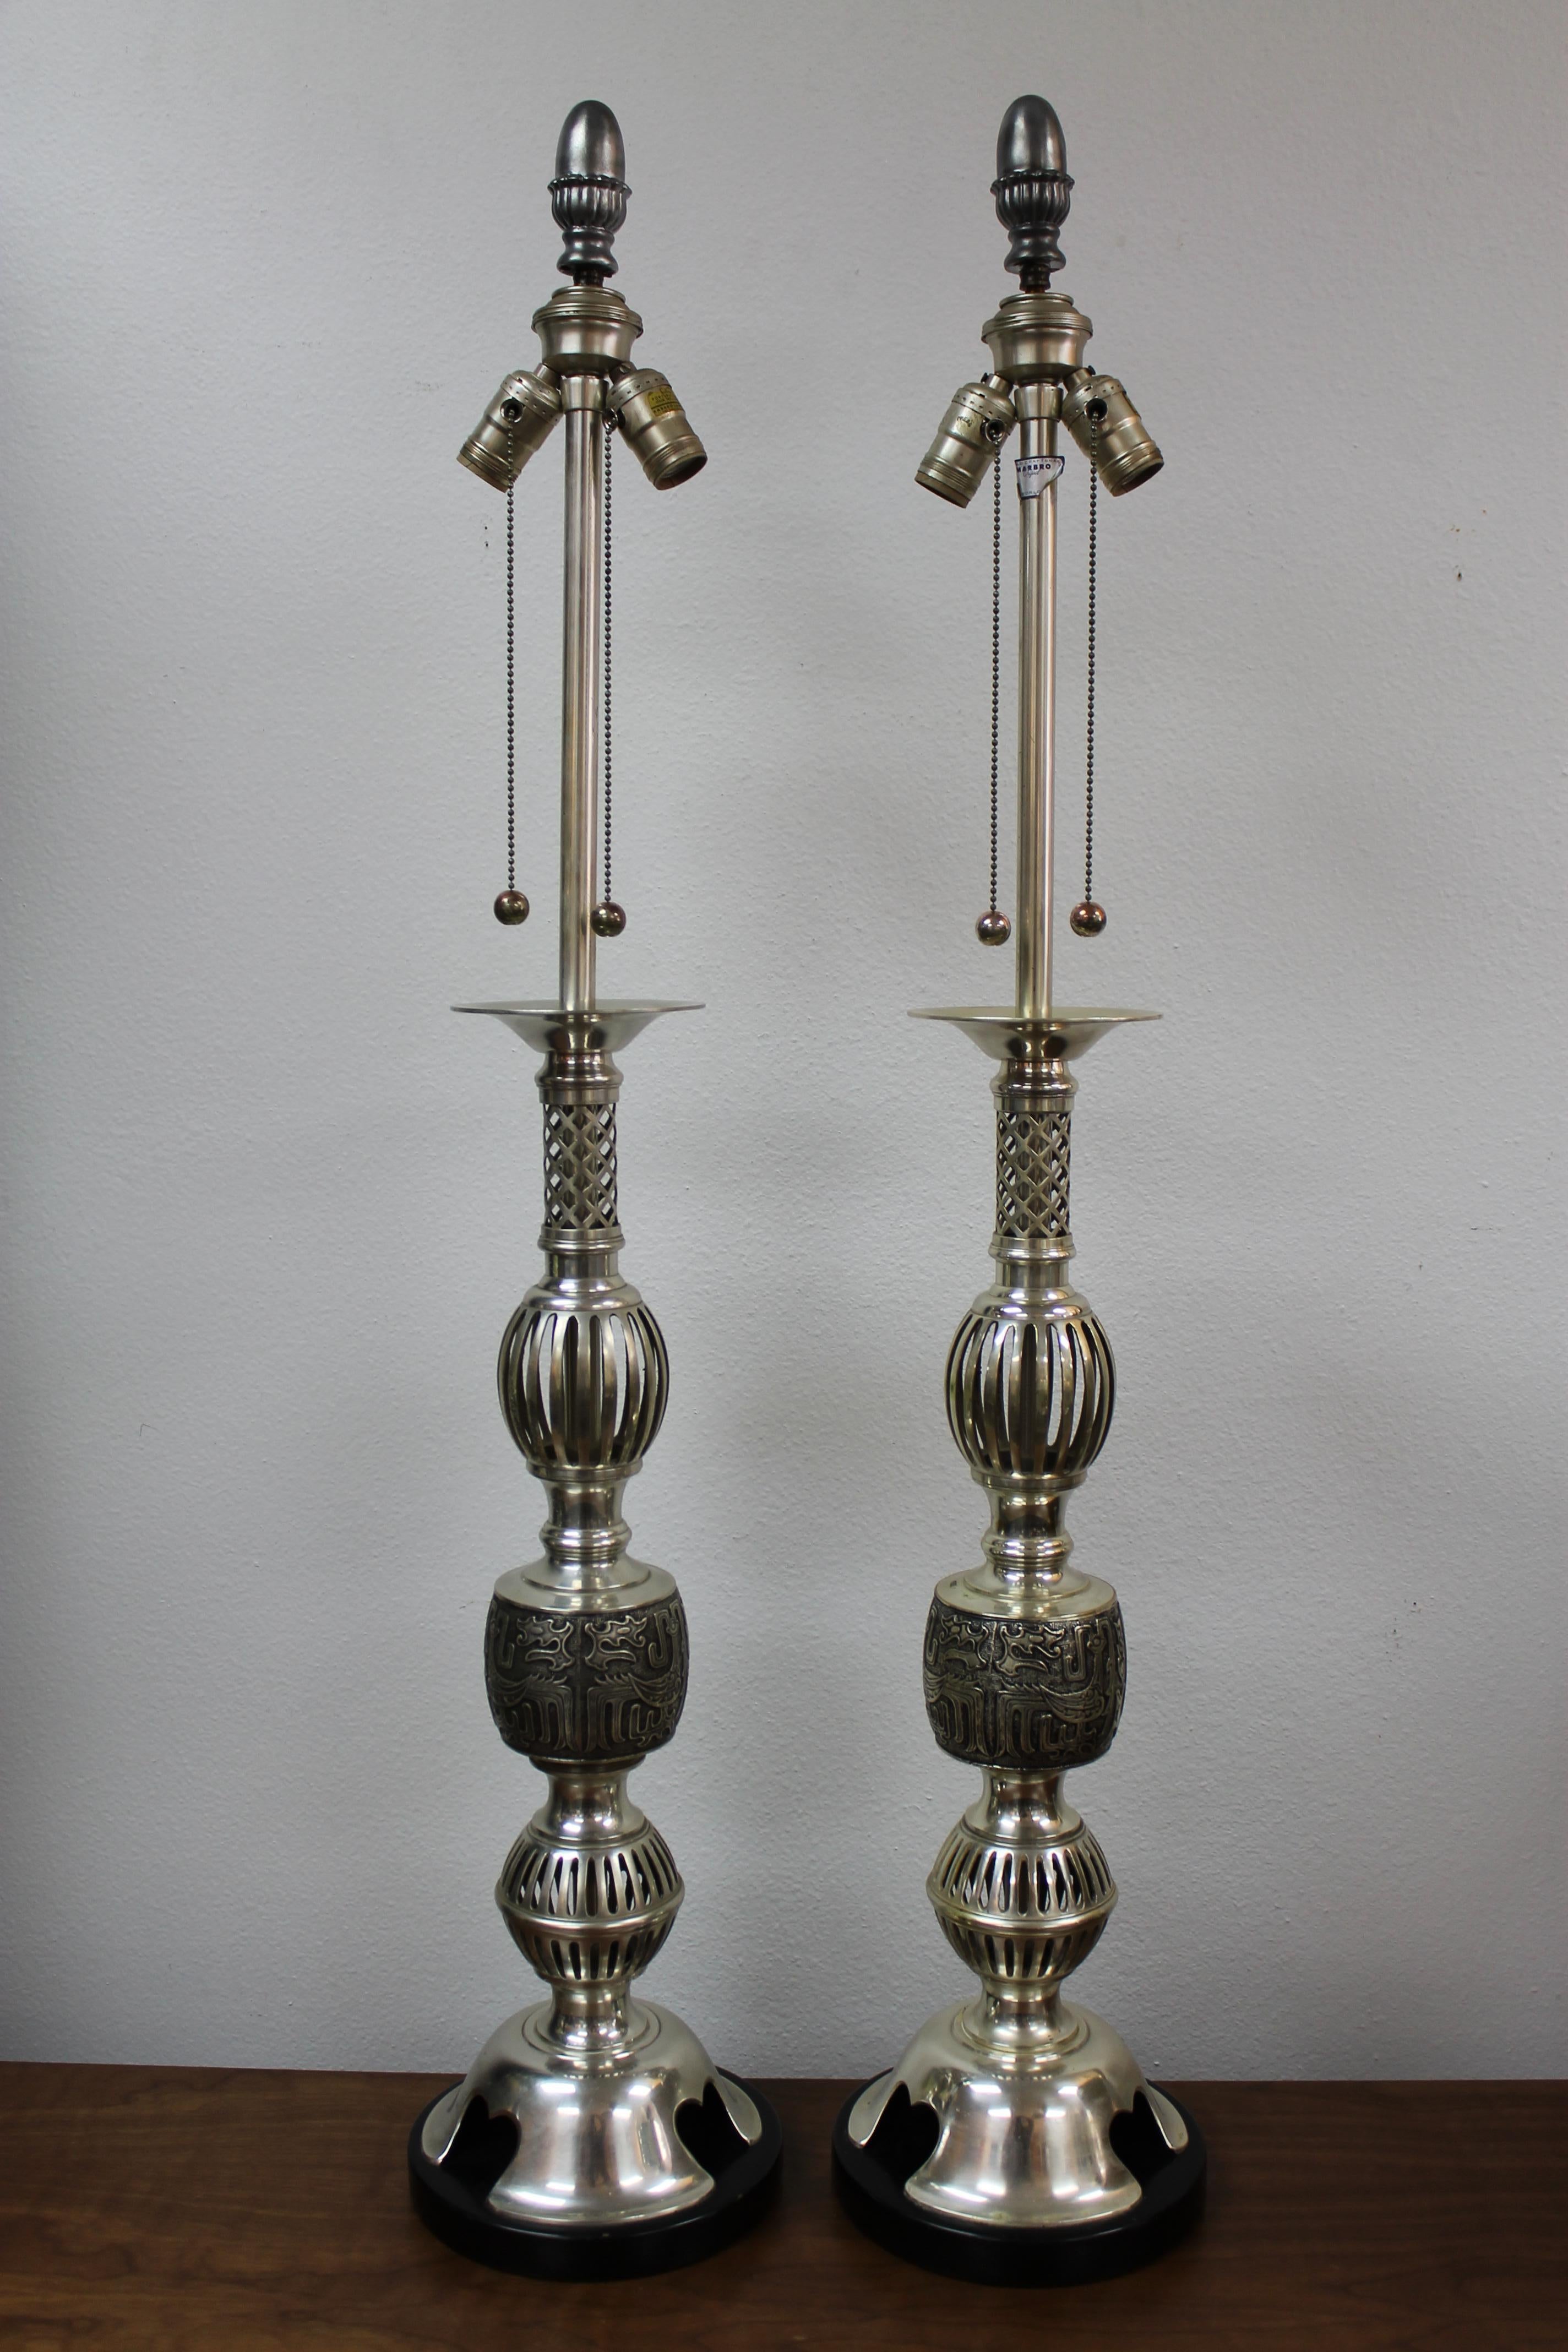 Monumental pair of pewter lamps by the Marbro lighting company. Each lamp measures 44.5